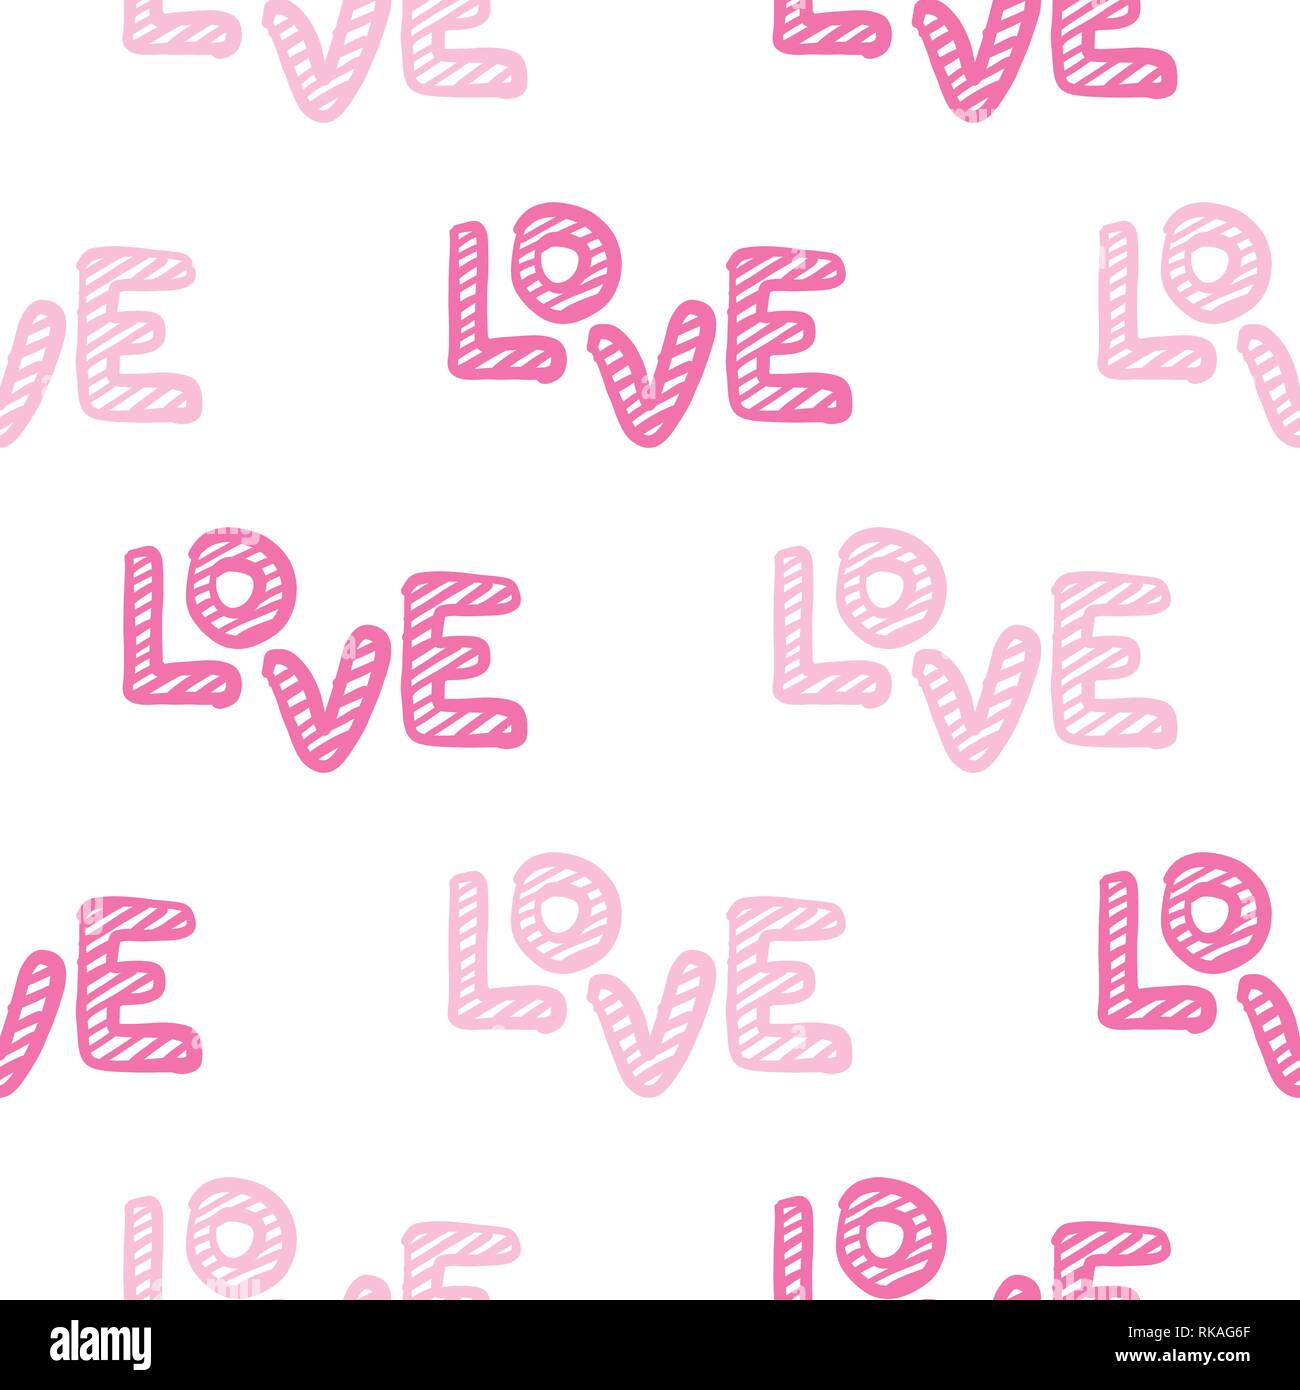 Love seamless pattern. Happy Valentines Day greeting card. Stock Vector